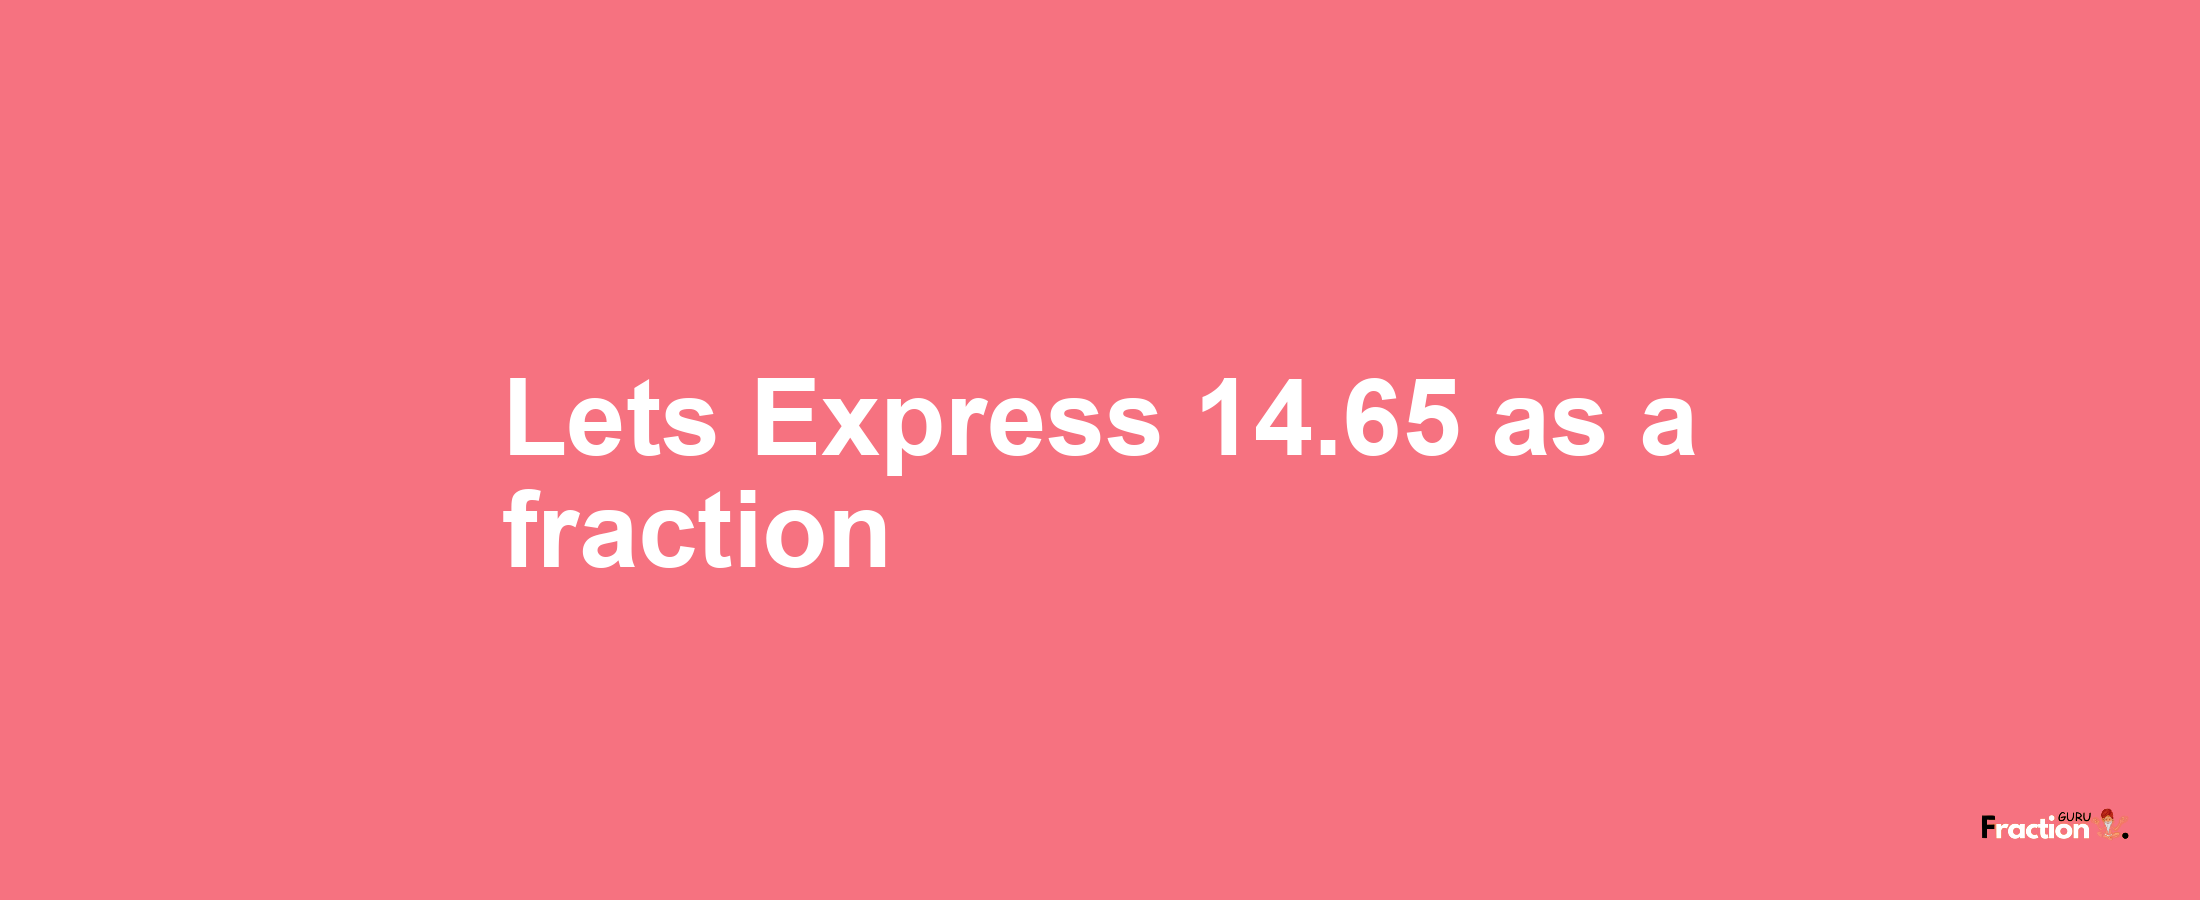 Lets Express 14.65 as afraction